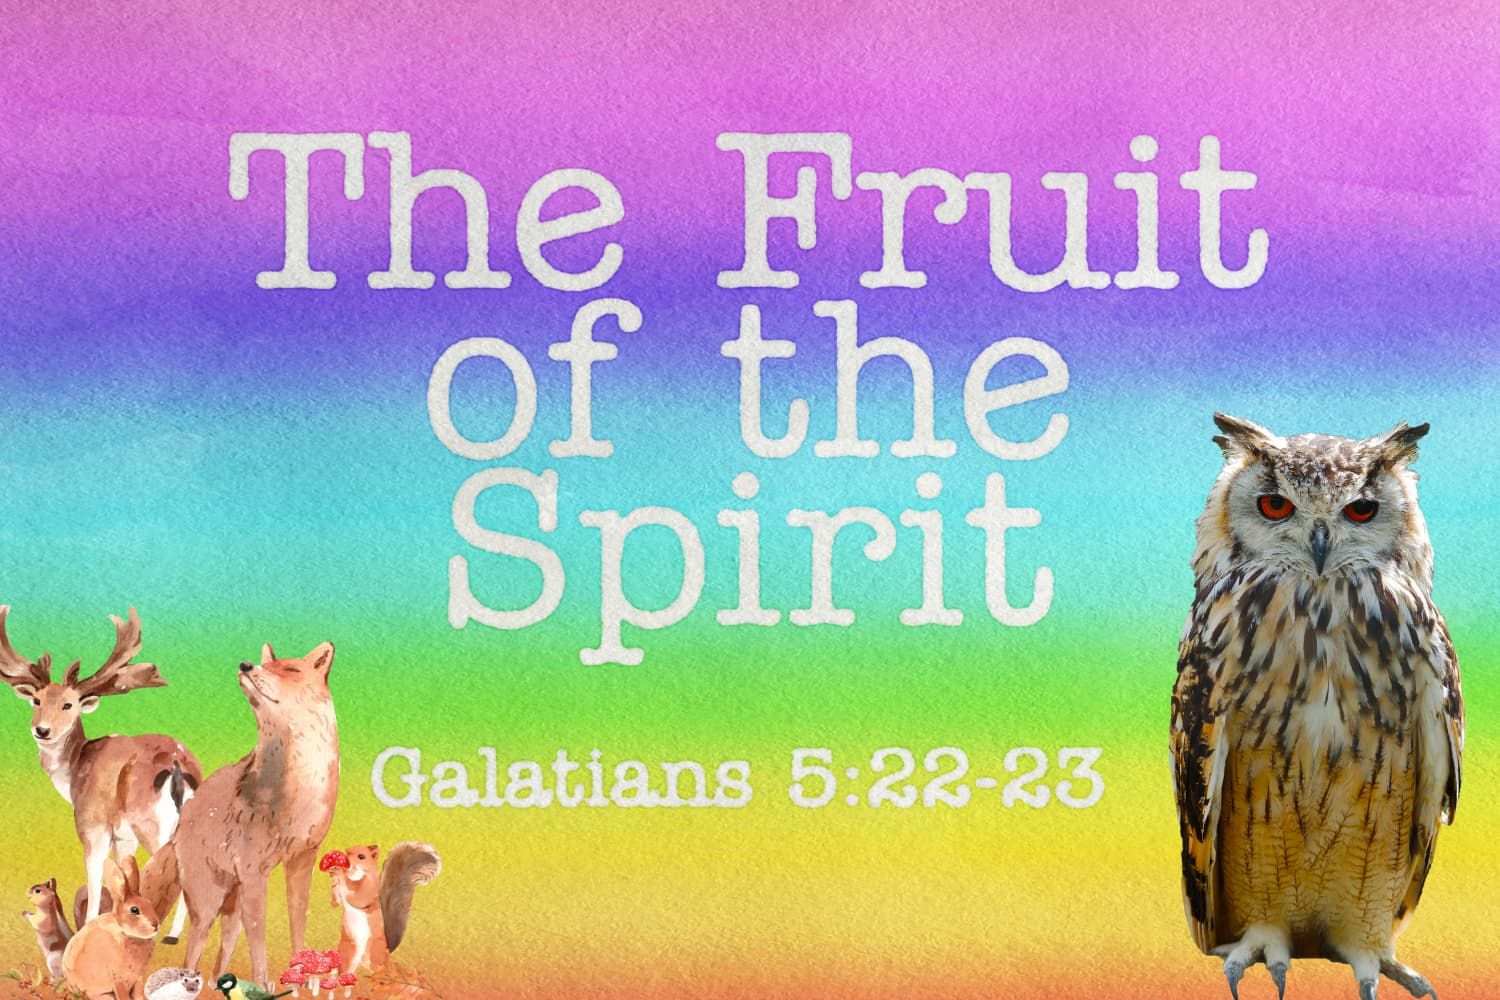 Parable%20-%20Wise%20owl%20and%20fruit%20of%20the%20spirit-d9417540 Peace